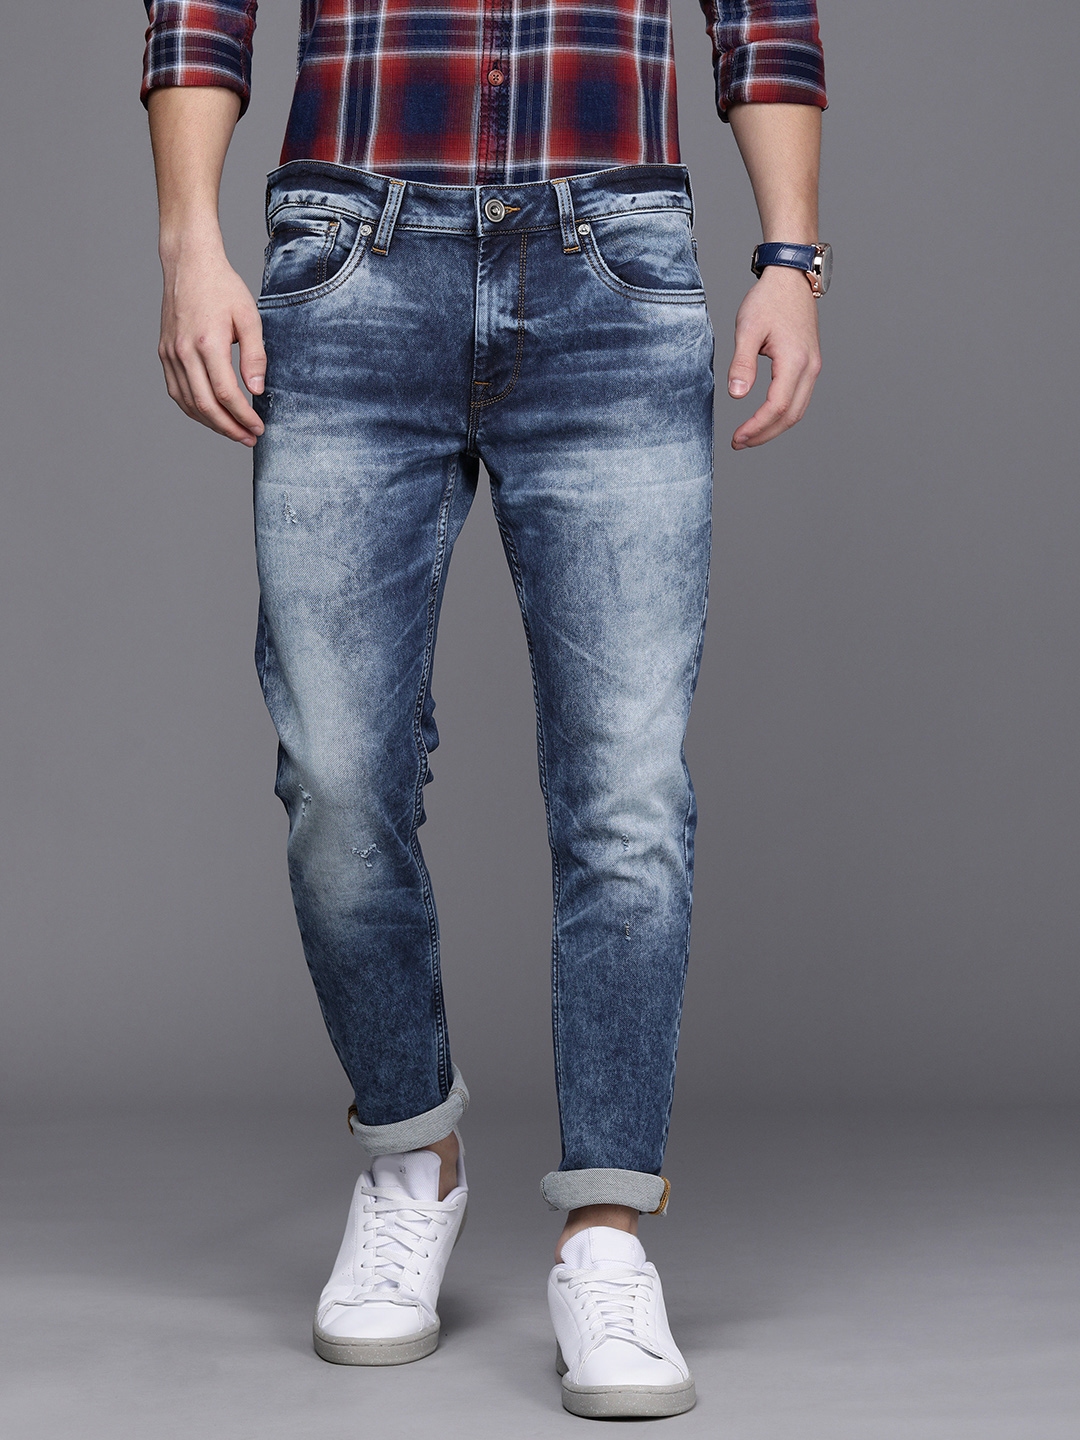 Buy Voi Jeans Men Blue Skinny Fit Low Distress Light Fade Stretchable ...